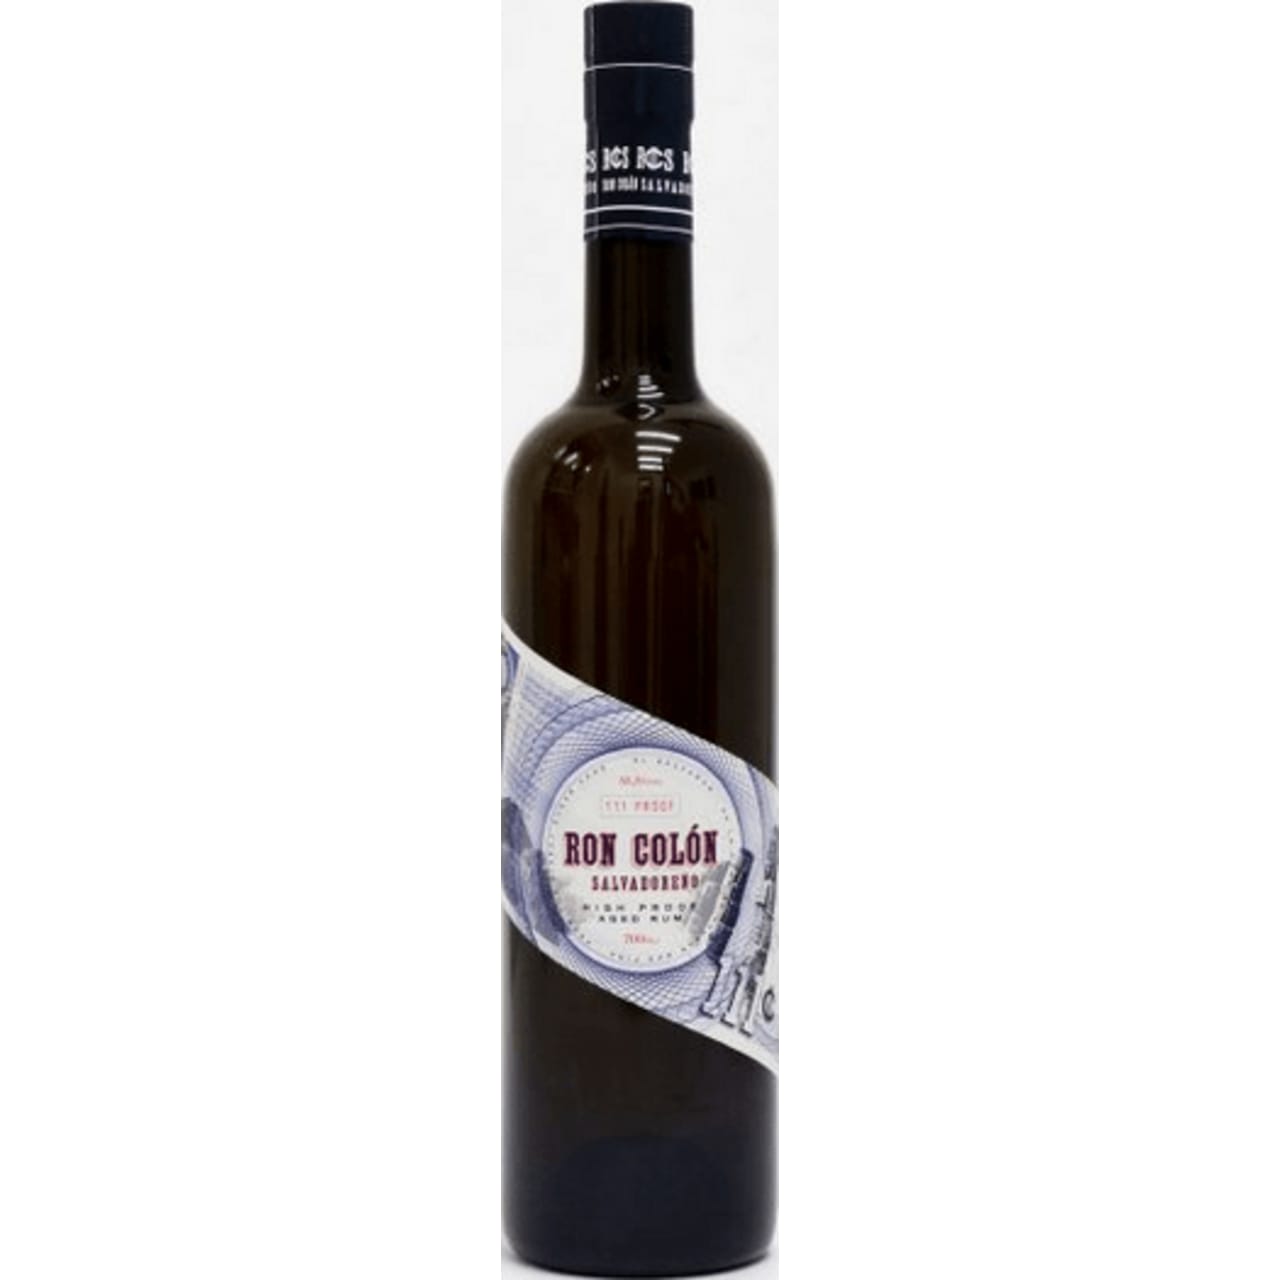 A flavoursome rum from Ron Colon, made with a combination of column-still rum from Licorera Cihautan Distillery in El Salvador and Jamaican rums from Worthy Park, Hampden and Monymusk. Fruity and full-bodied.